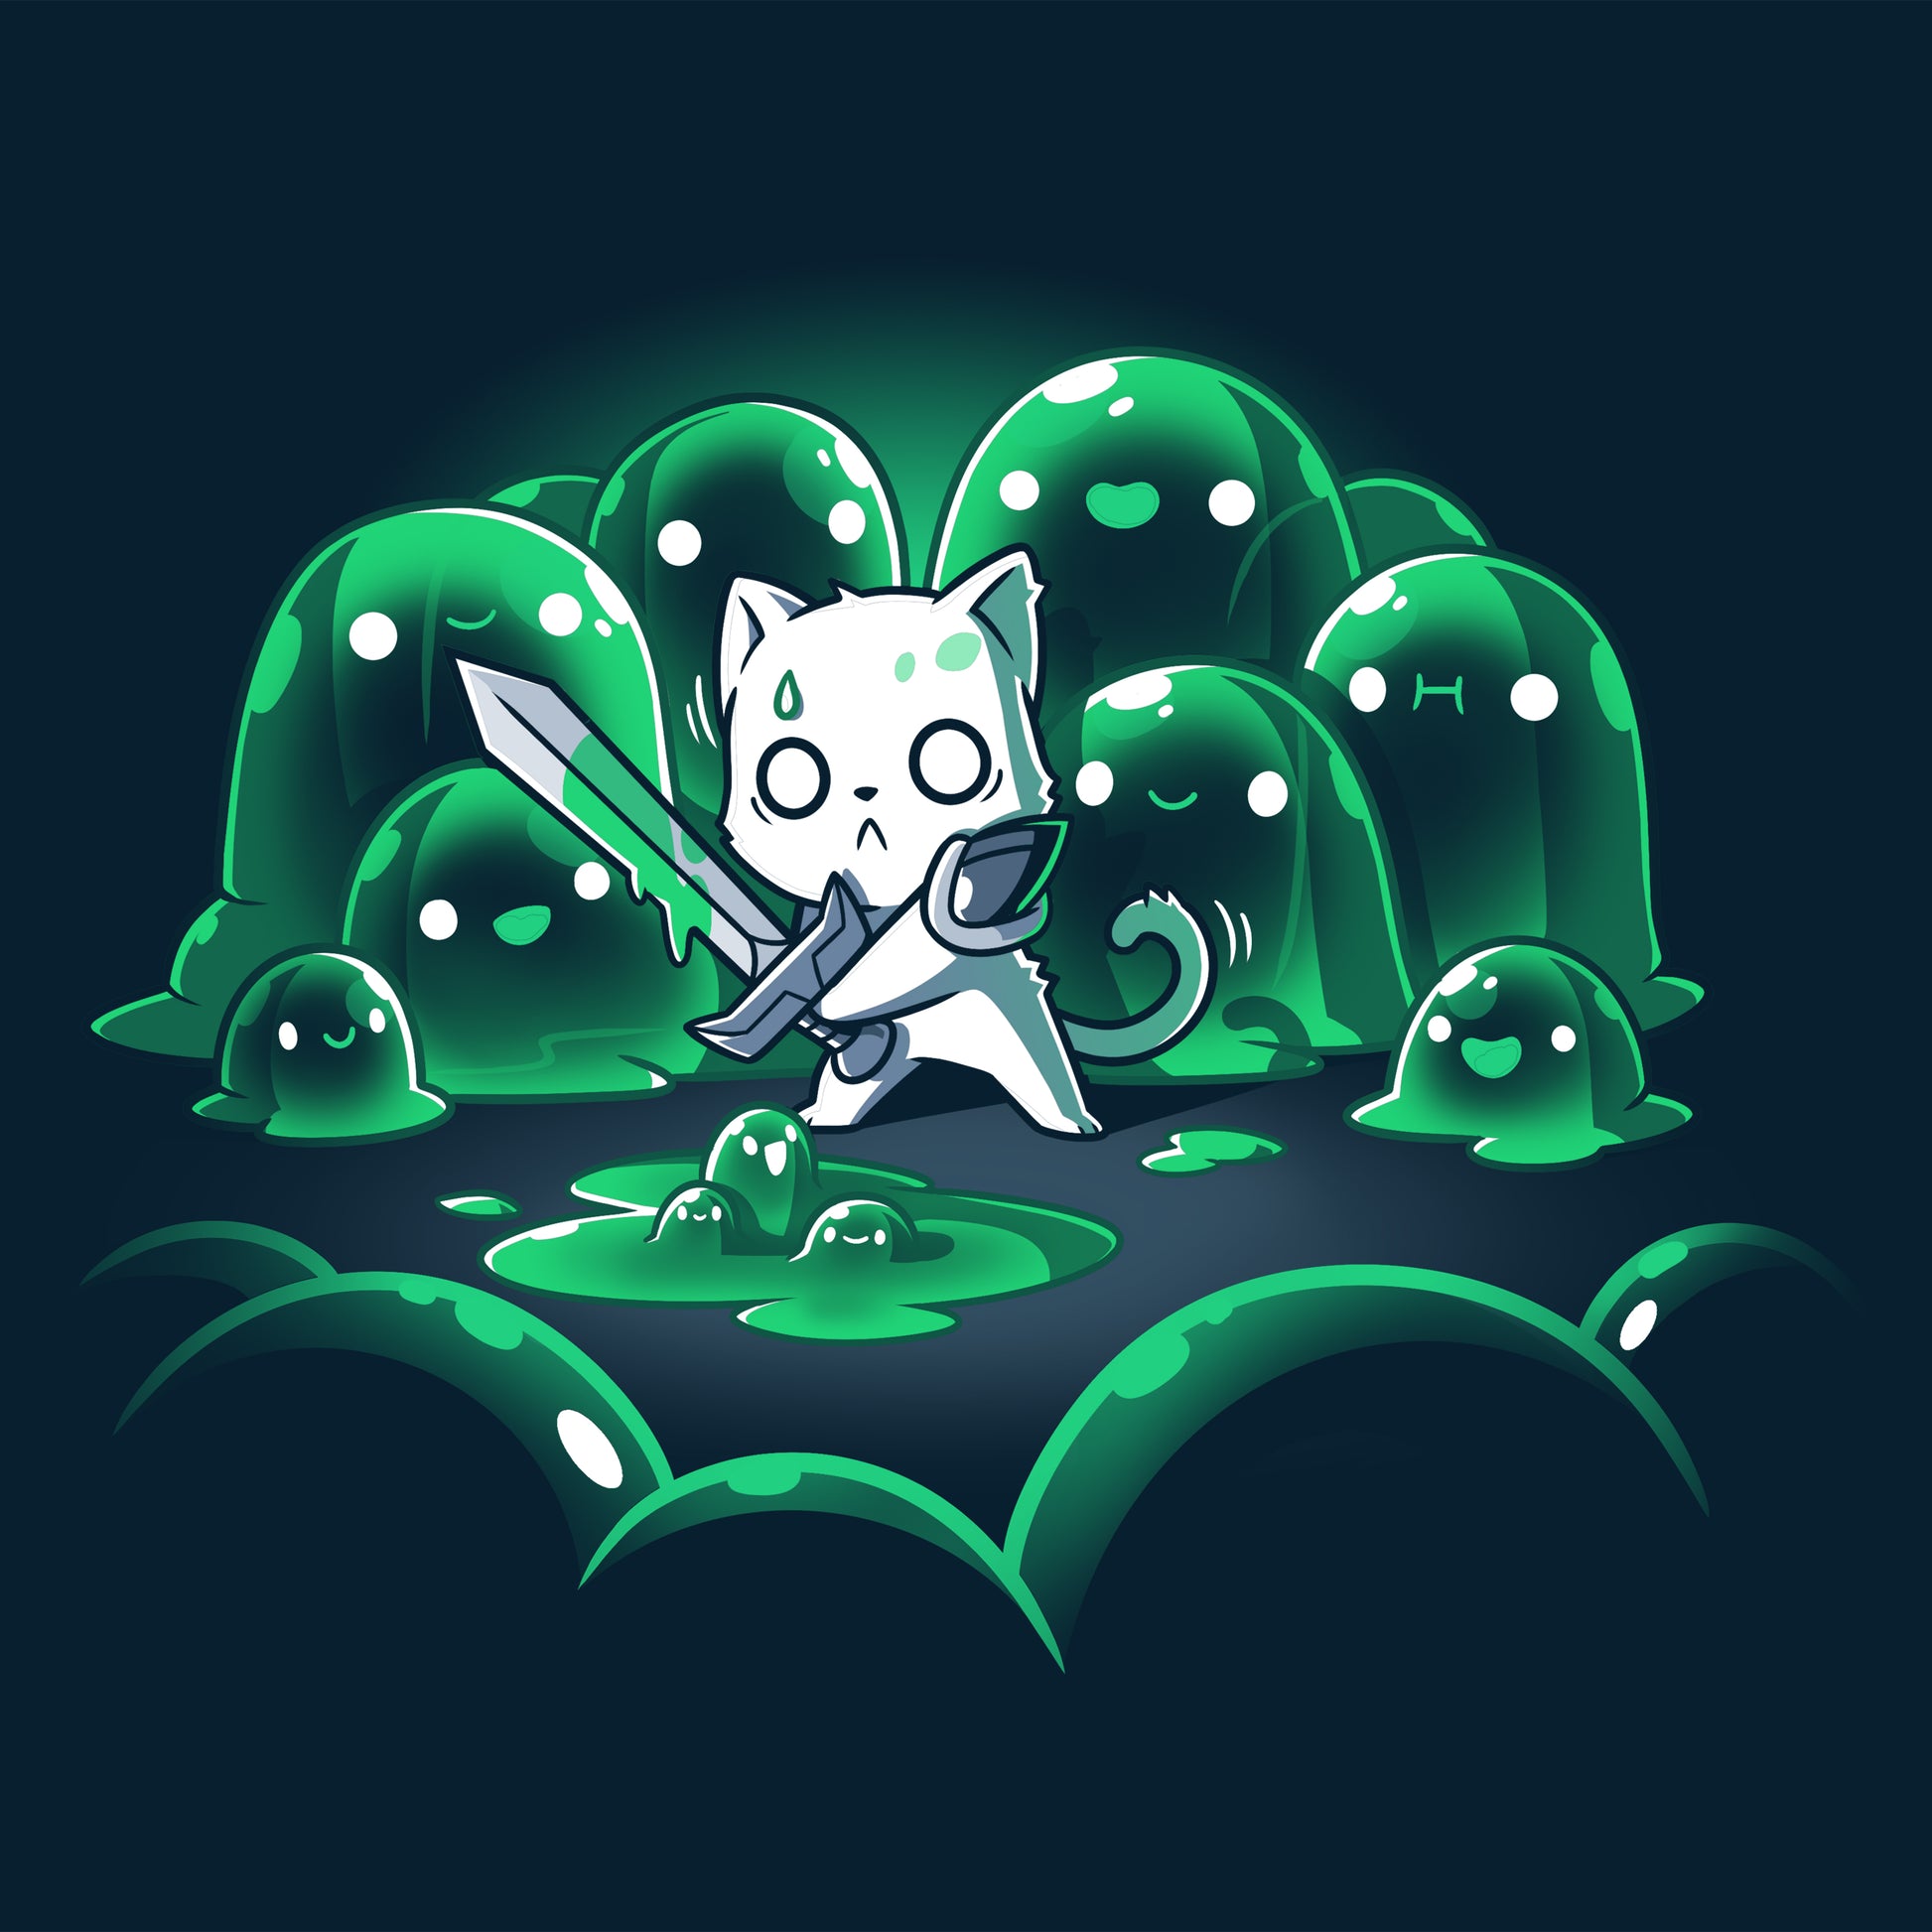 A friendly cat with The Never-Ending Fight sword among TeeTurtle green monster blobs.